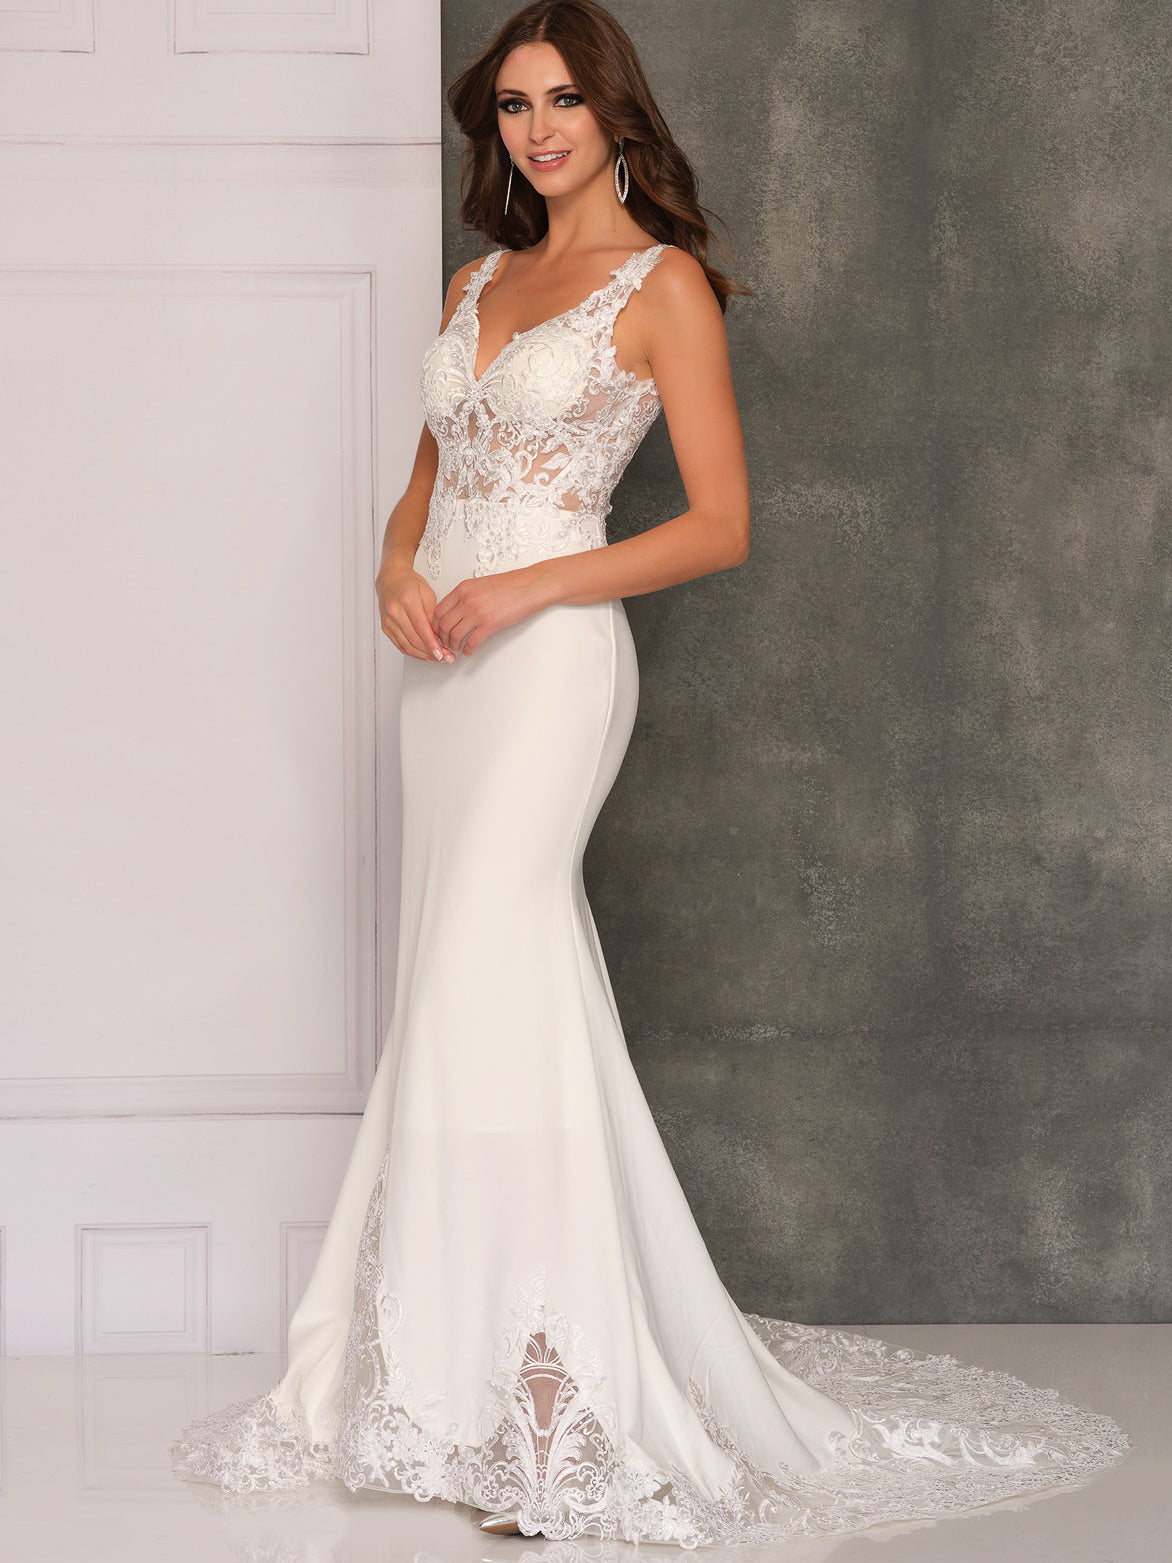 FIT & FLARE WEDDING DRESS WITH LACE TRAIN